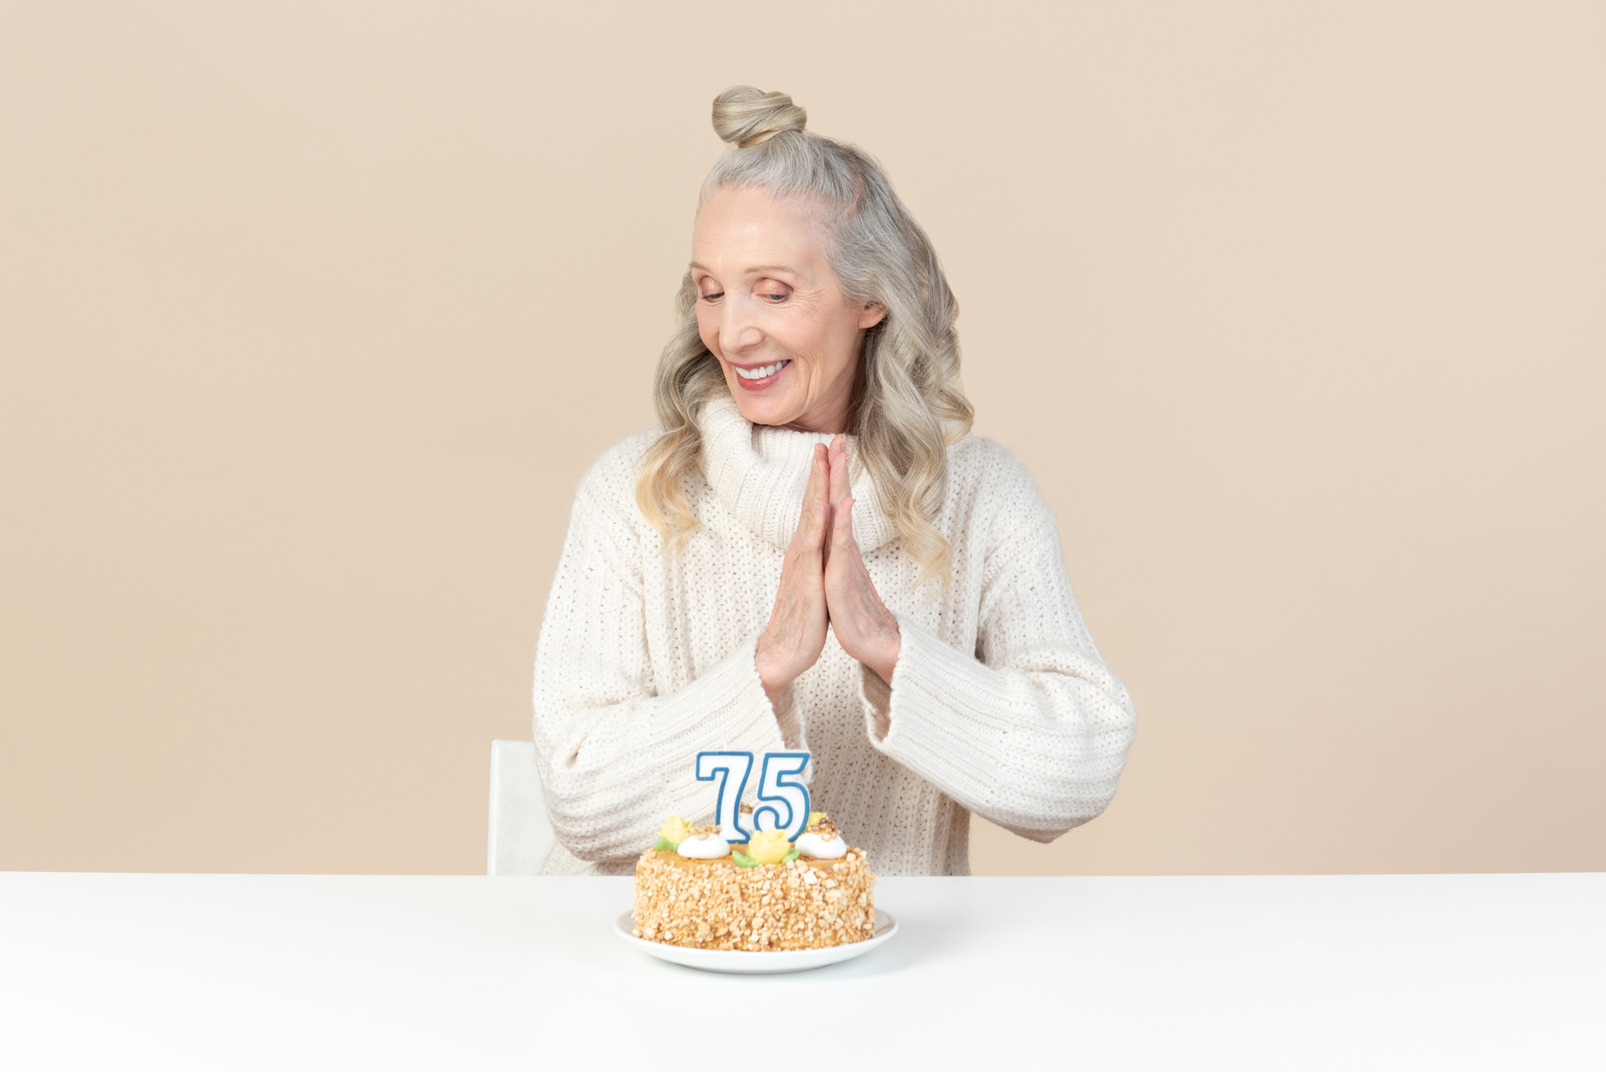 Old woman clapping hands for her seventy fifrth birthday